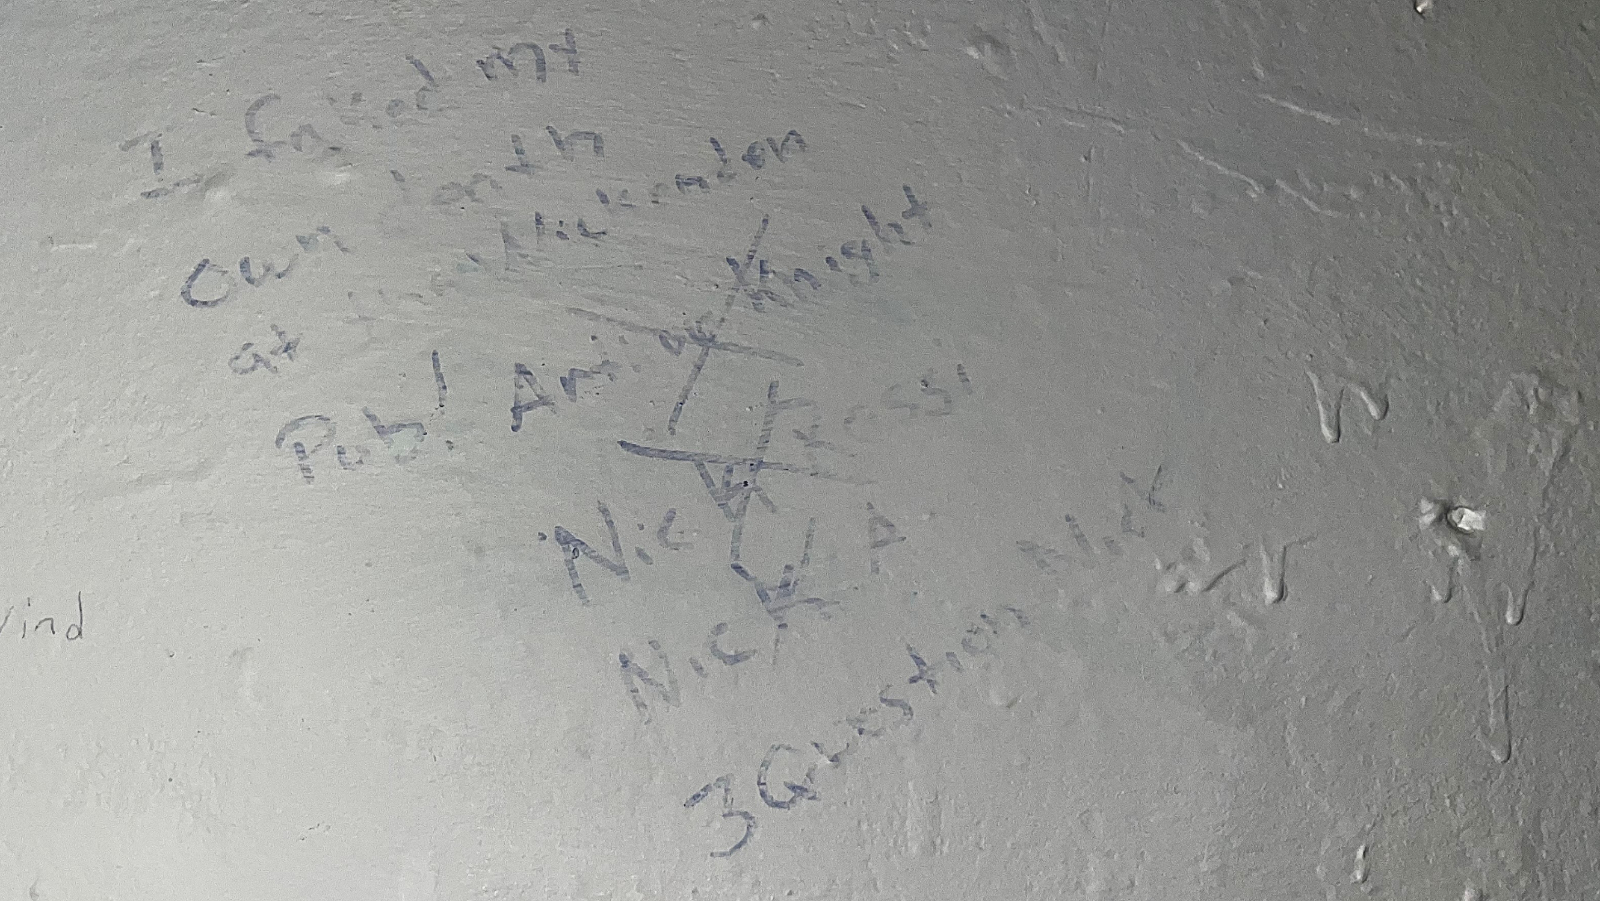 The list of names on the toilet wall in the Wickenden.